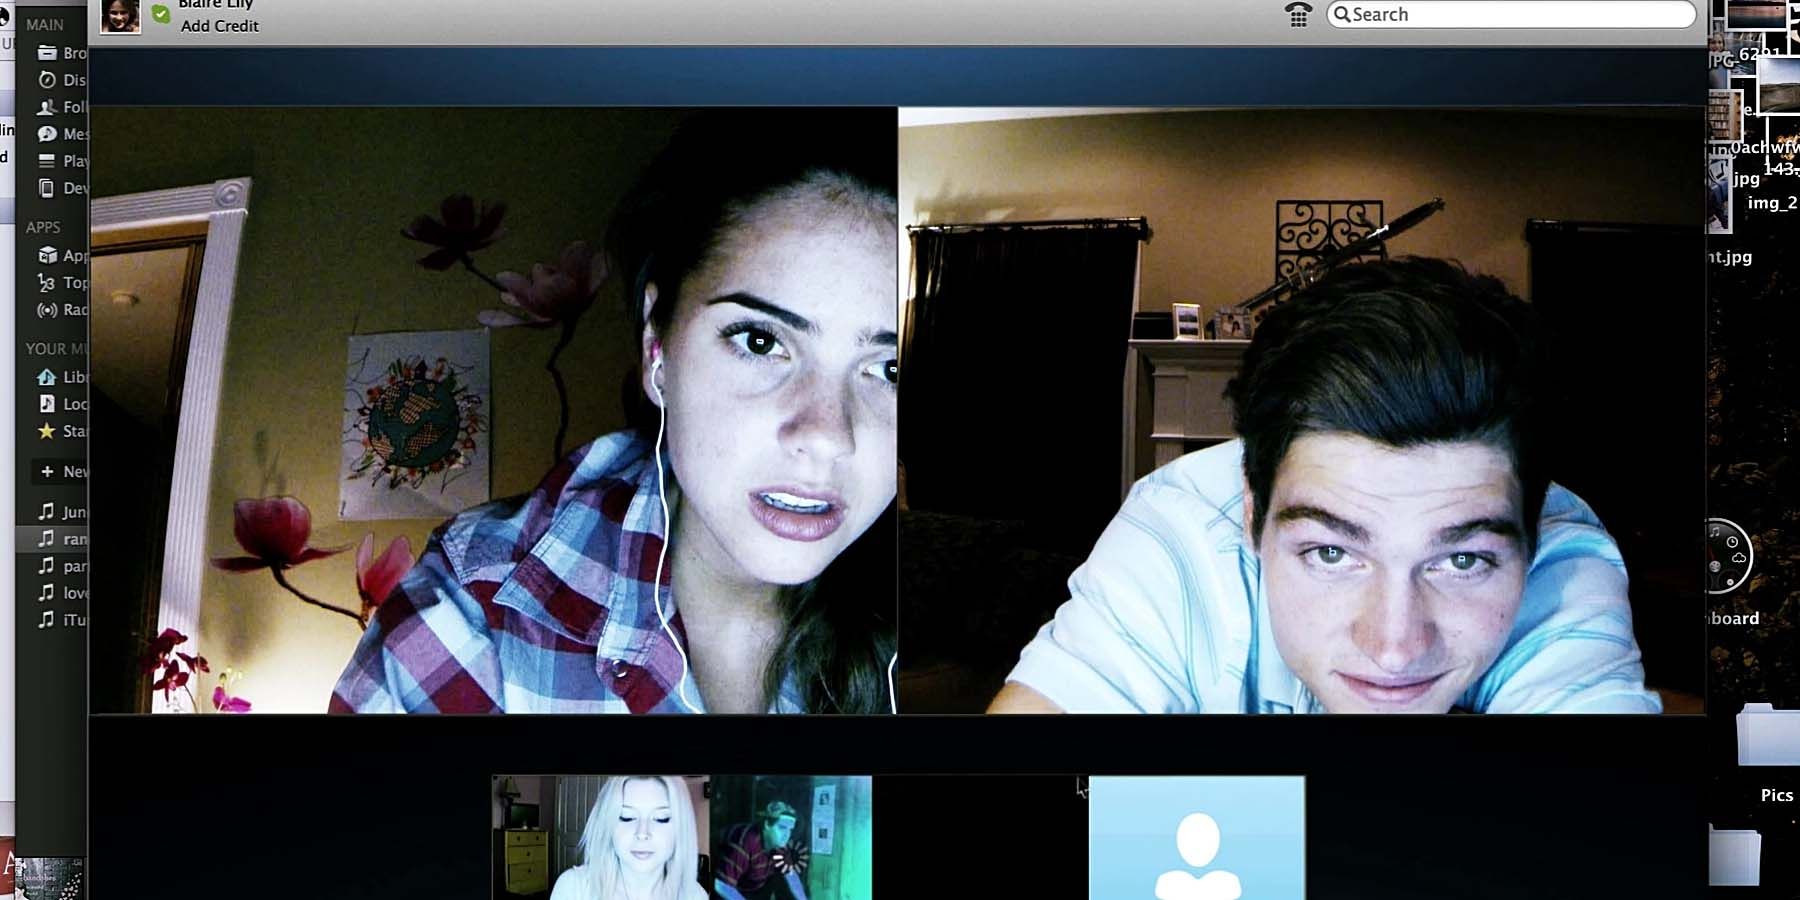 The video call in Unfriended